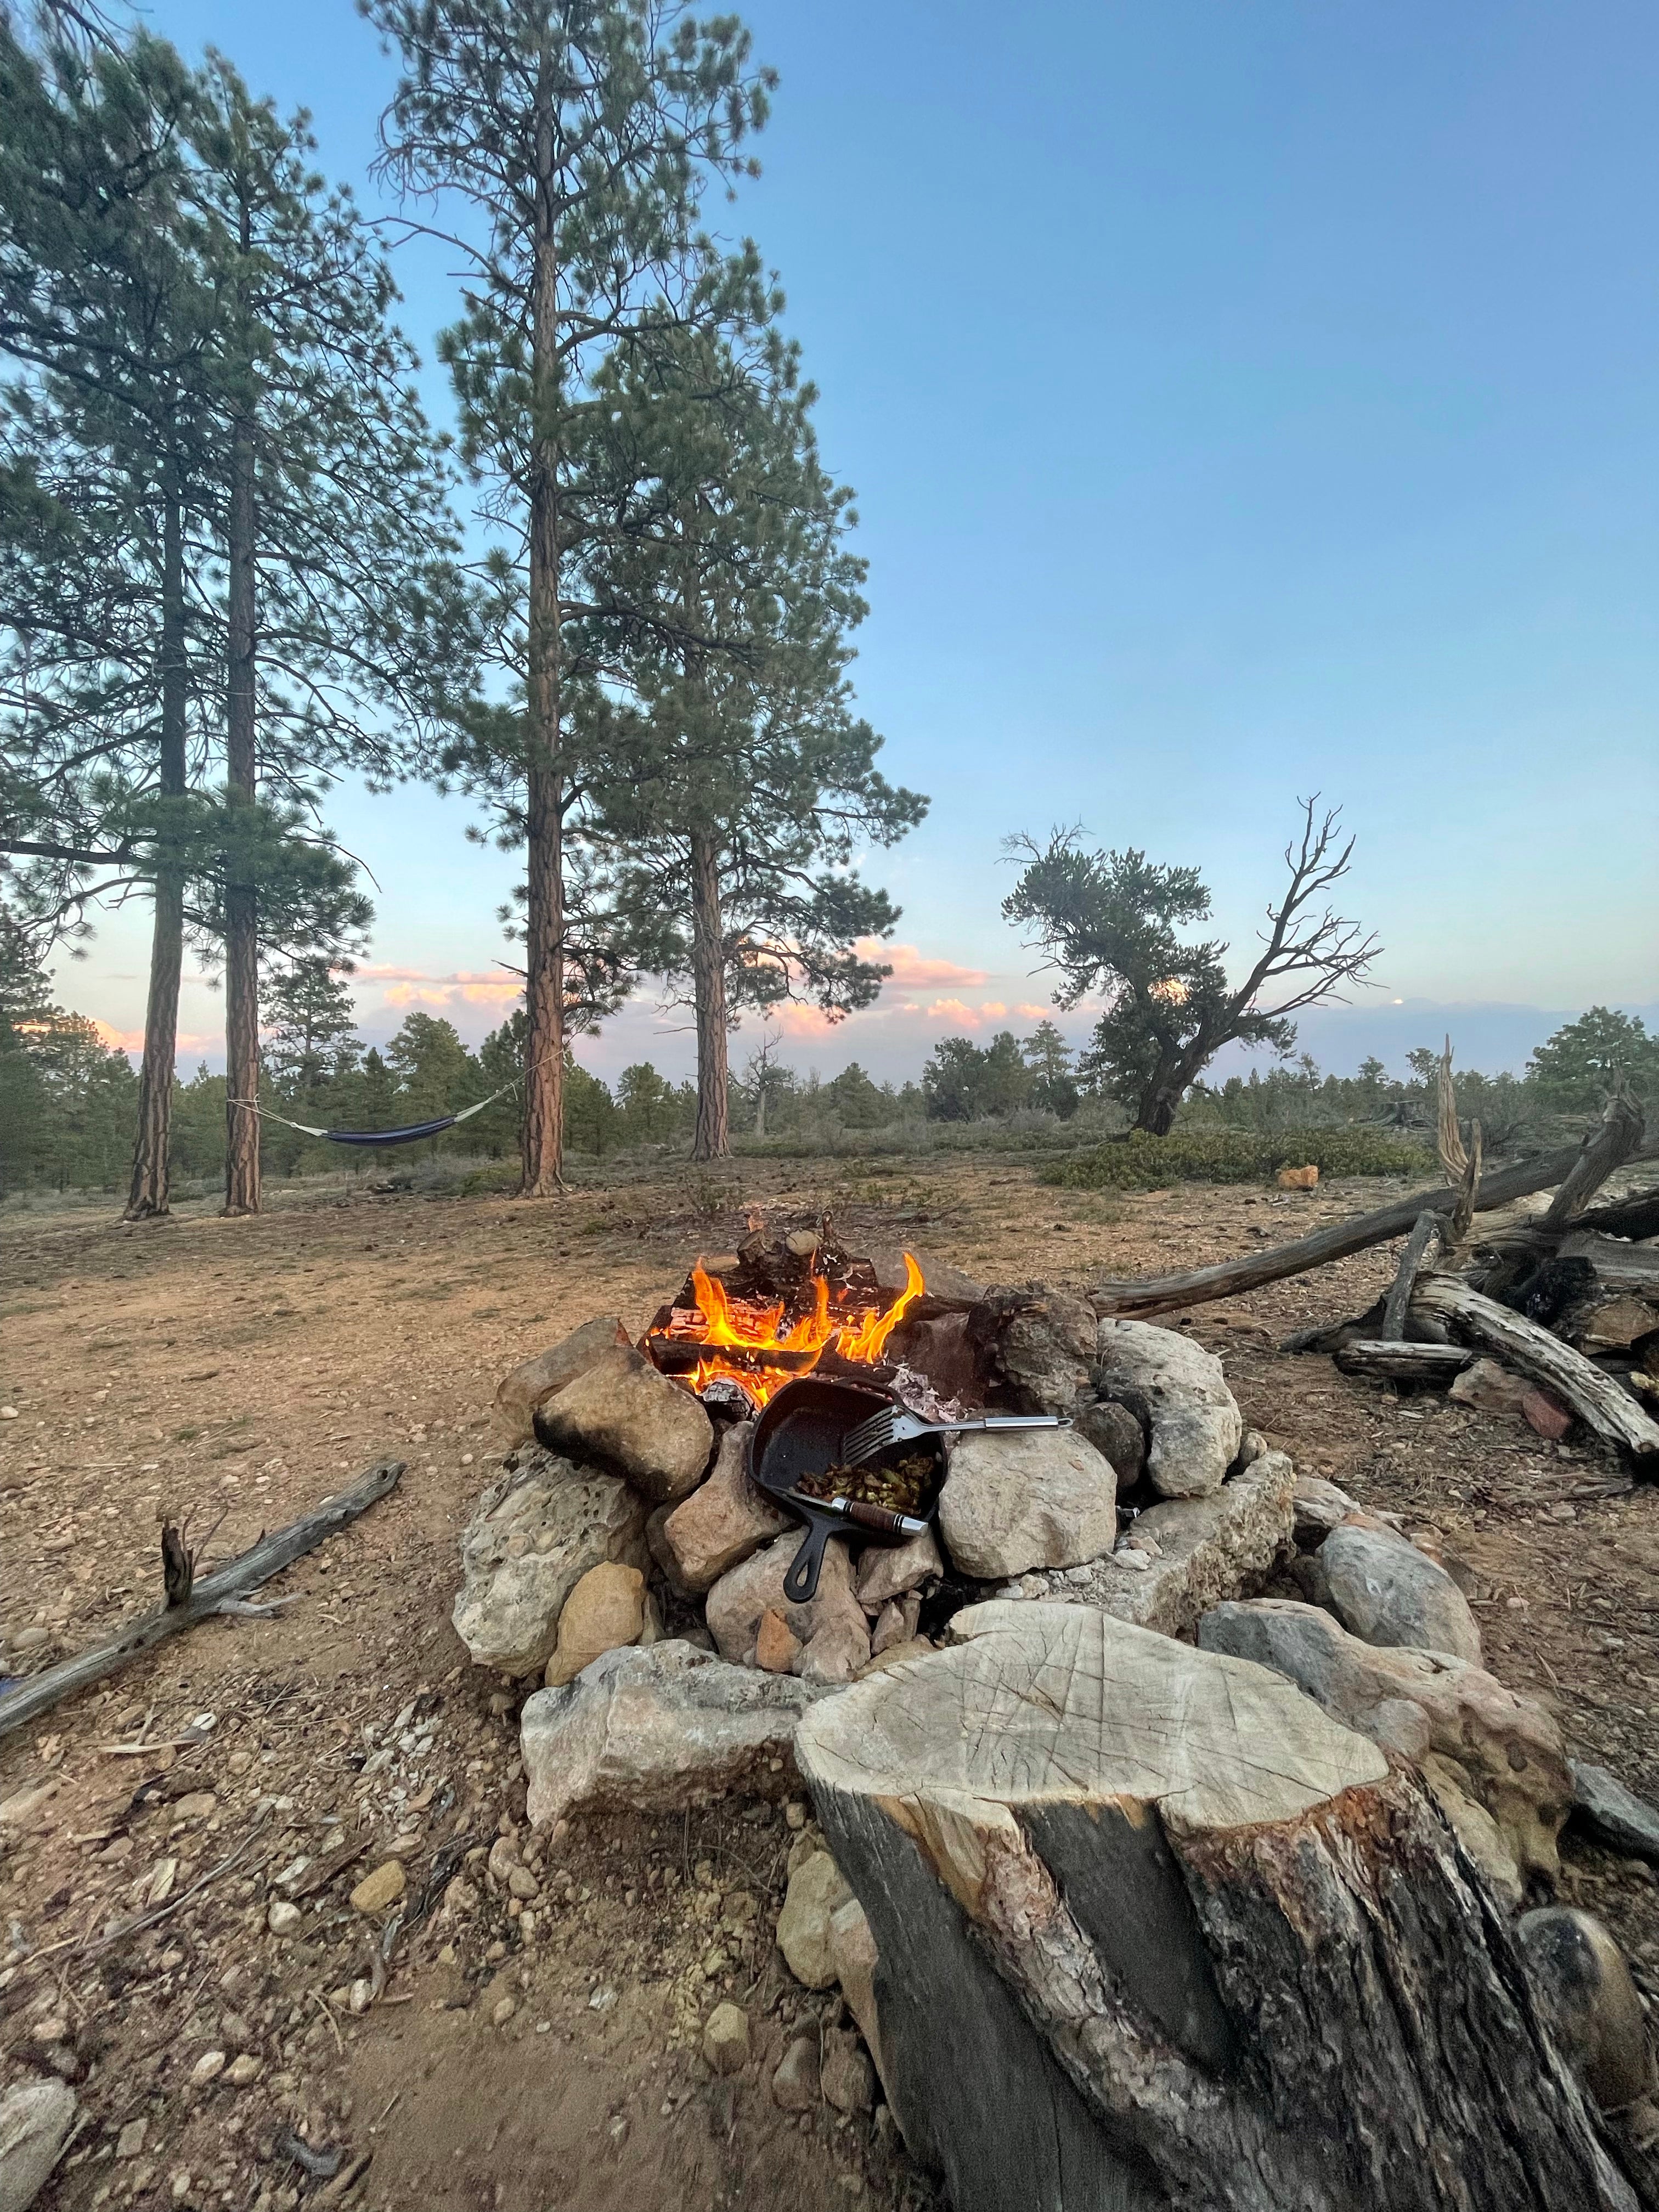 Camper submitted image from FS #117 Rd Dispersed Camping - 4